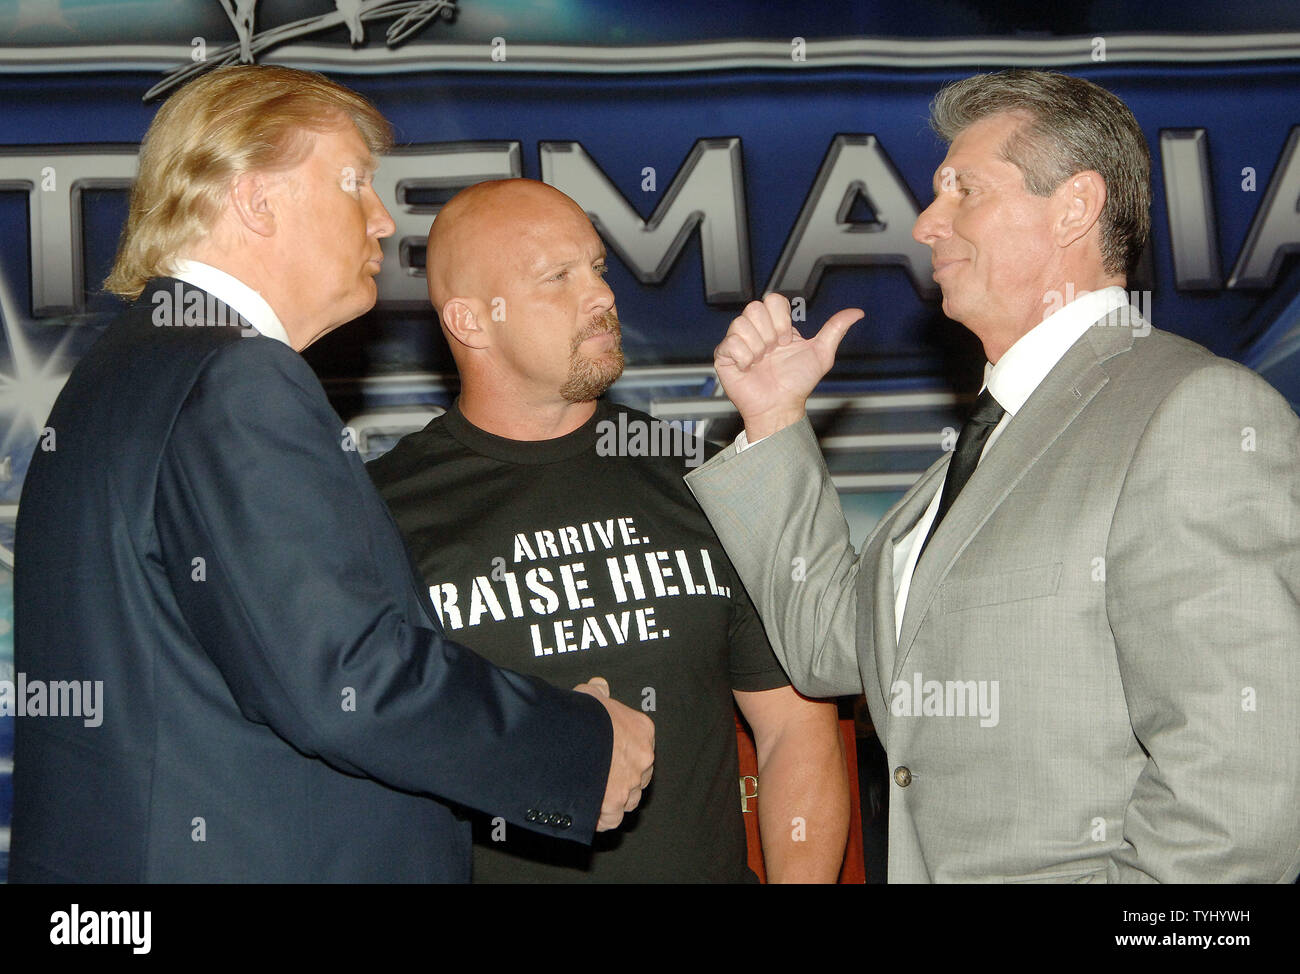 Wrestler/referee Stone Cold Steve Austin (C) looks on while World Wrestling Entertainment CEO Vince McMahon (R) pulls on the tie of business icon Donald Trump during a March 28, 2007 photo op in New York to announce their up coming 'Battle of the Billionaires' match on April 1, 2007 in Detroit. (UPI Photo/Ezio Petersen) Stock Photo